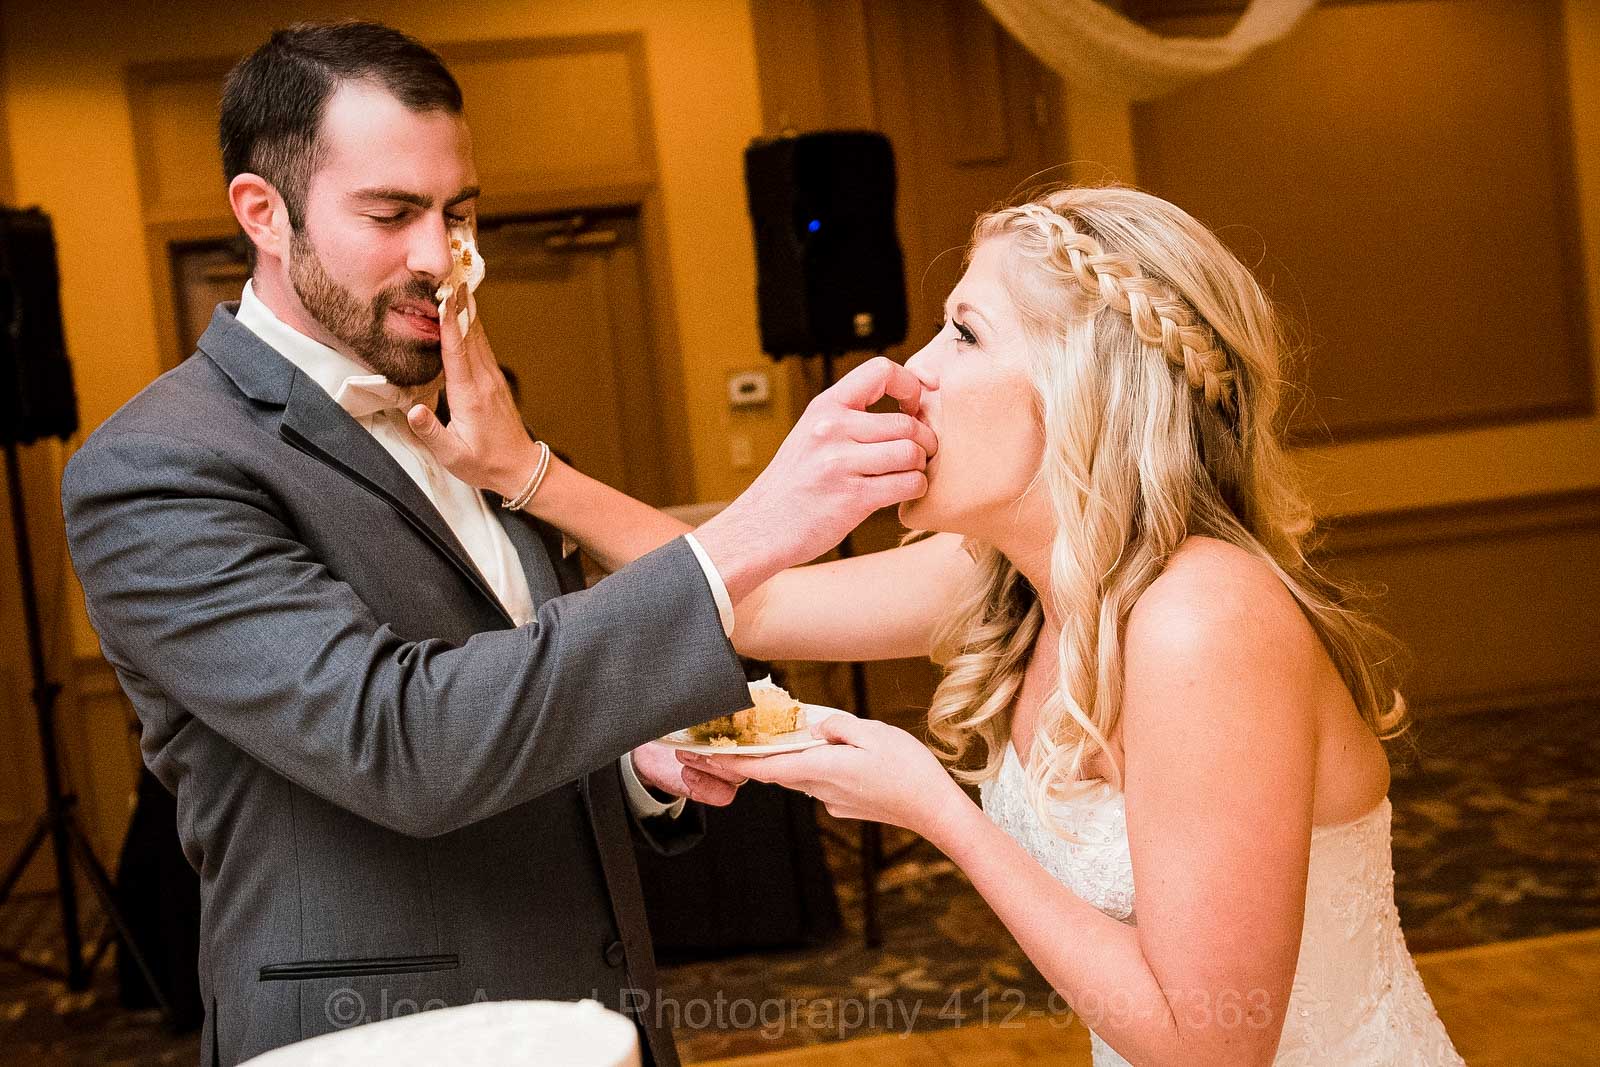 A bride smashes cake into her groom's face during their wedding reception at the Embassy Suites hotel near the Pittsburgh International Airport.